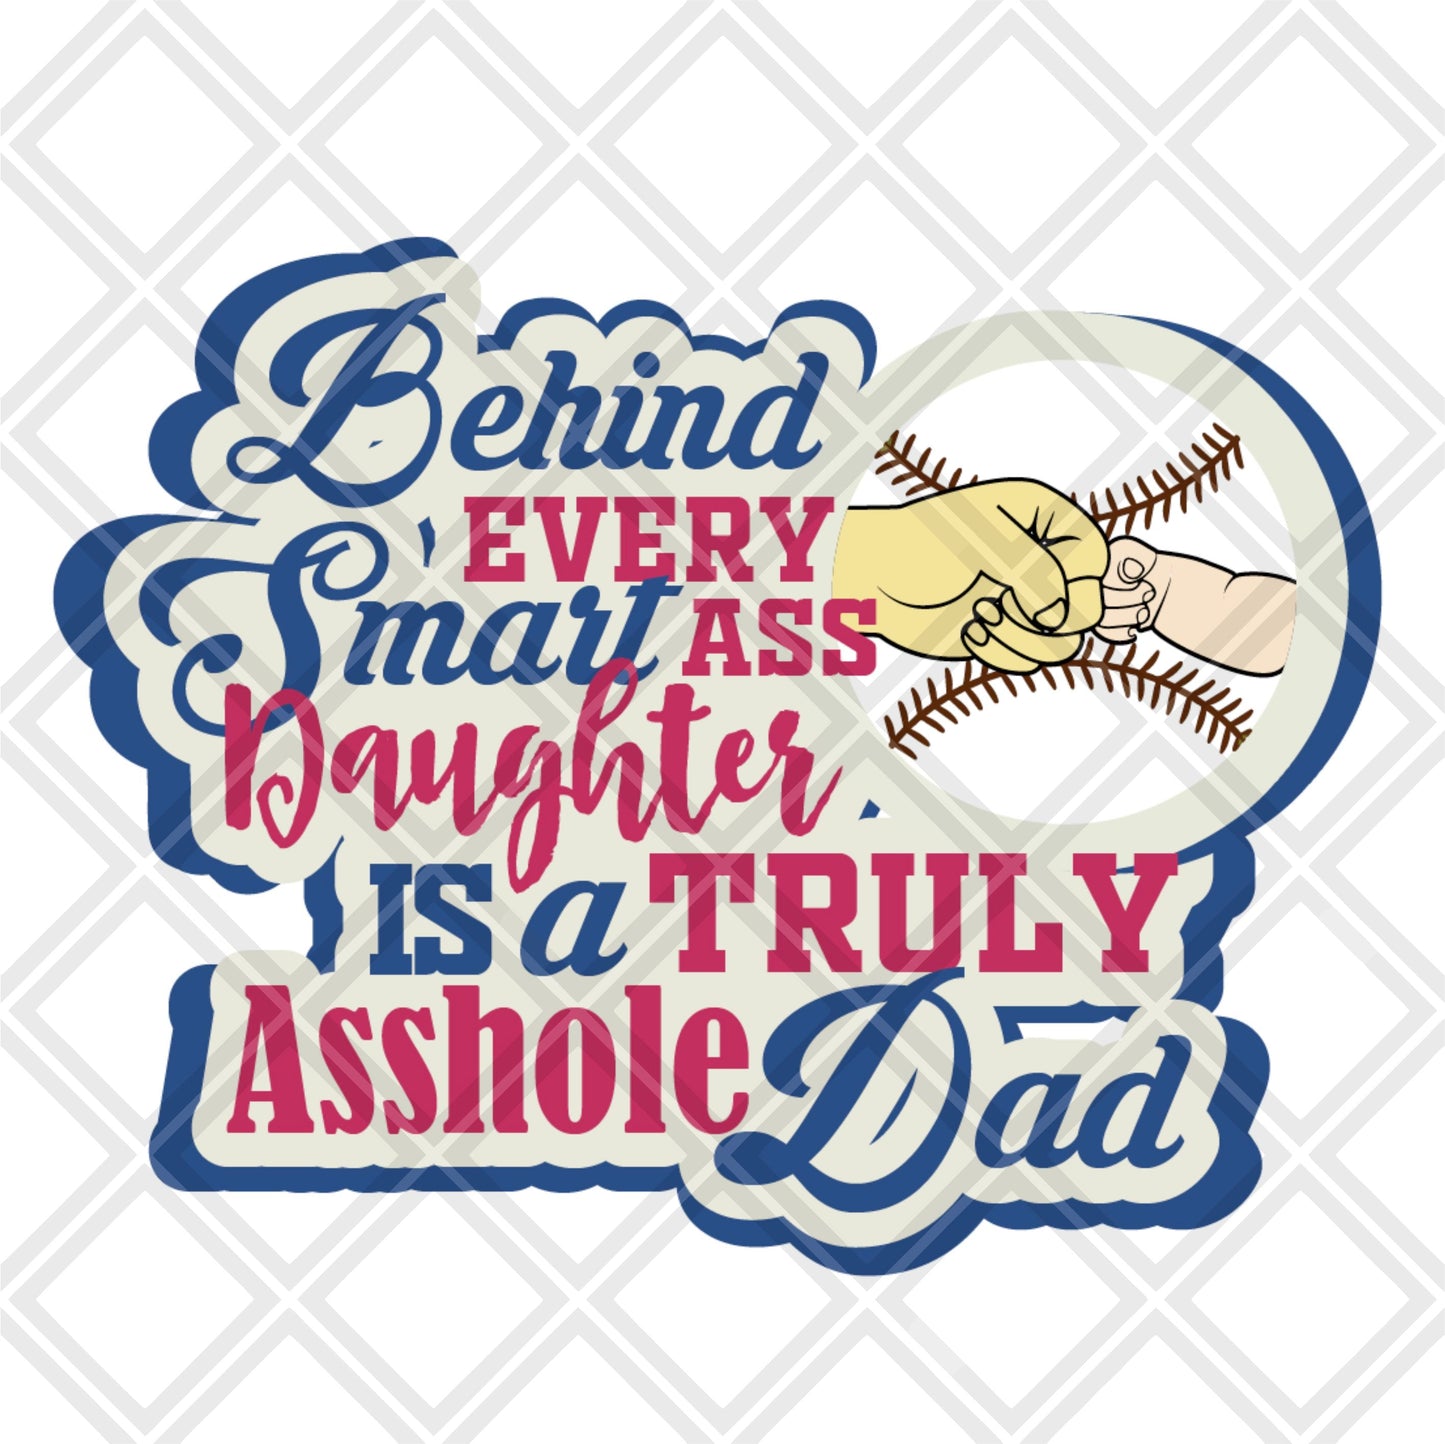 Behind every smart ass daughter is a asshole dad baseball DTF TRANSFERPRINT TO ORDER